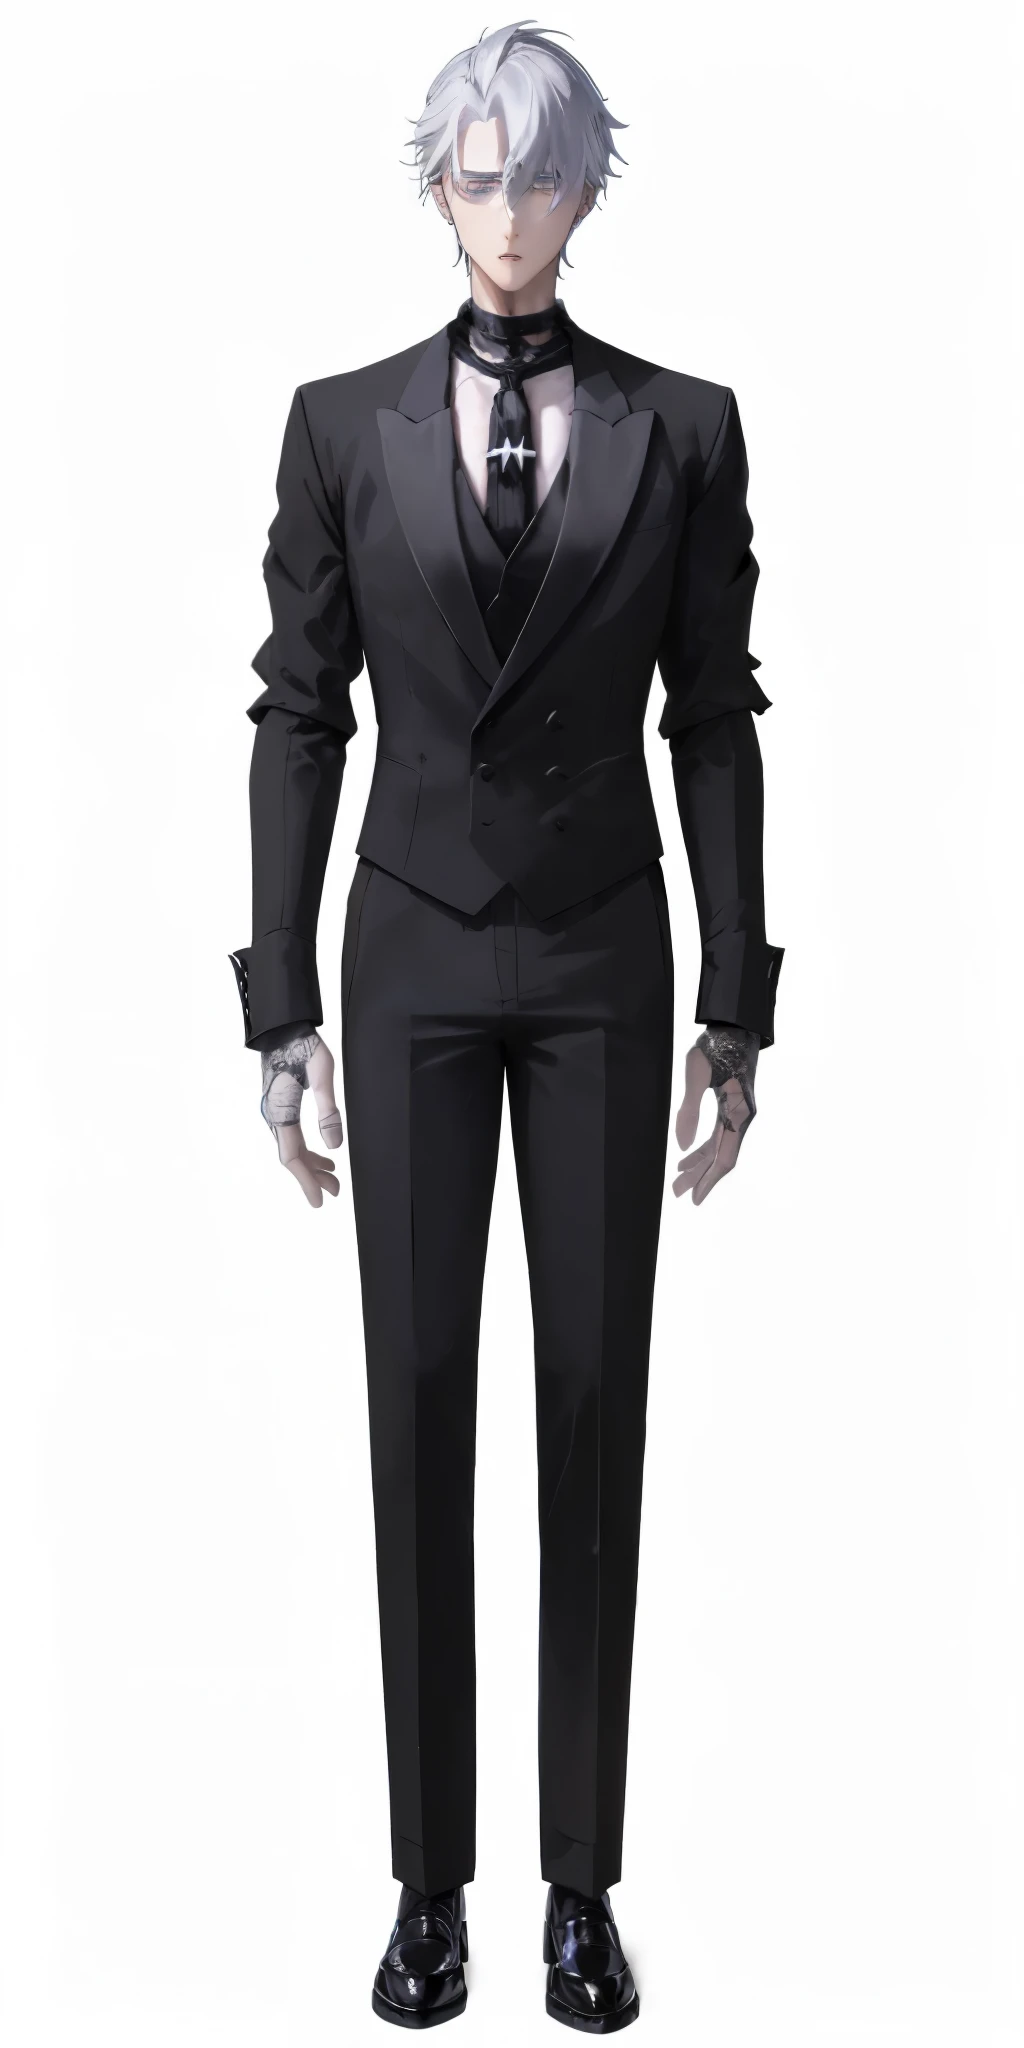 anime character dressed in black suit and tie with white hair, !!full body portrait!!, slender man, man in black suit, wearing a black suit, single character full body, dark suit, wearing black suit, in a black suit, fullbody portrait, tall anime guy with blue eyes, formal black suit. detailed, full body single character,hd quality 